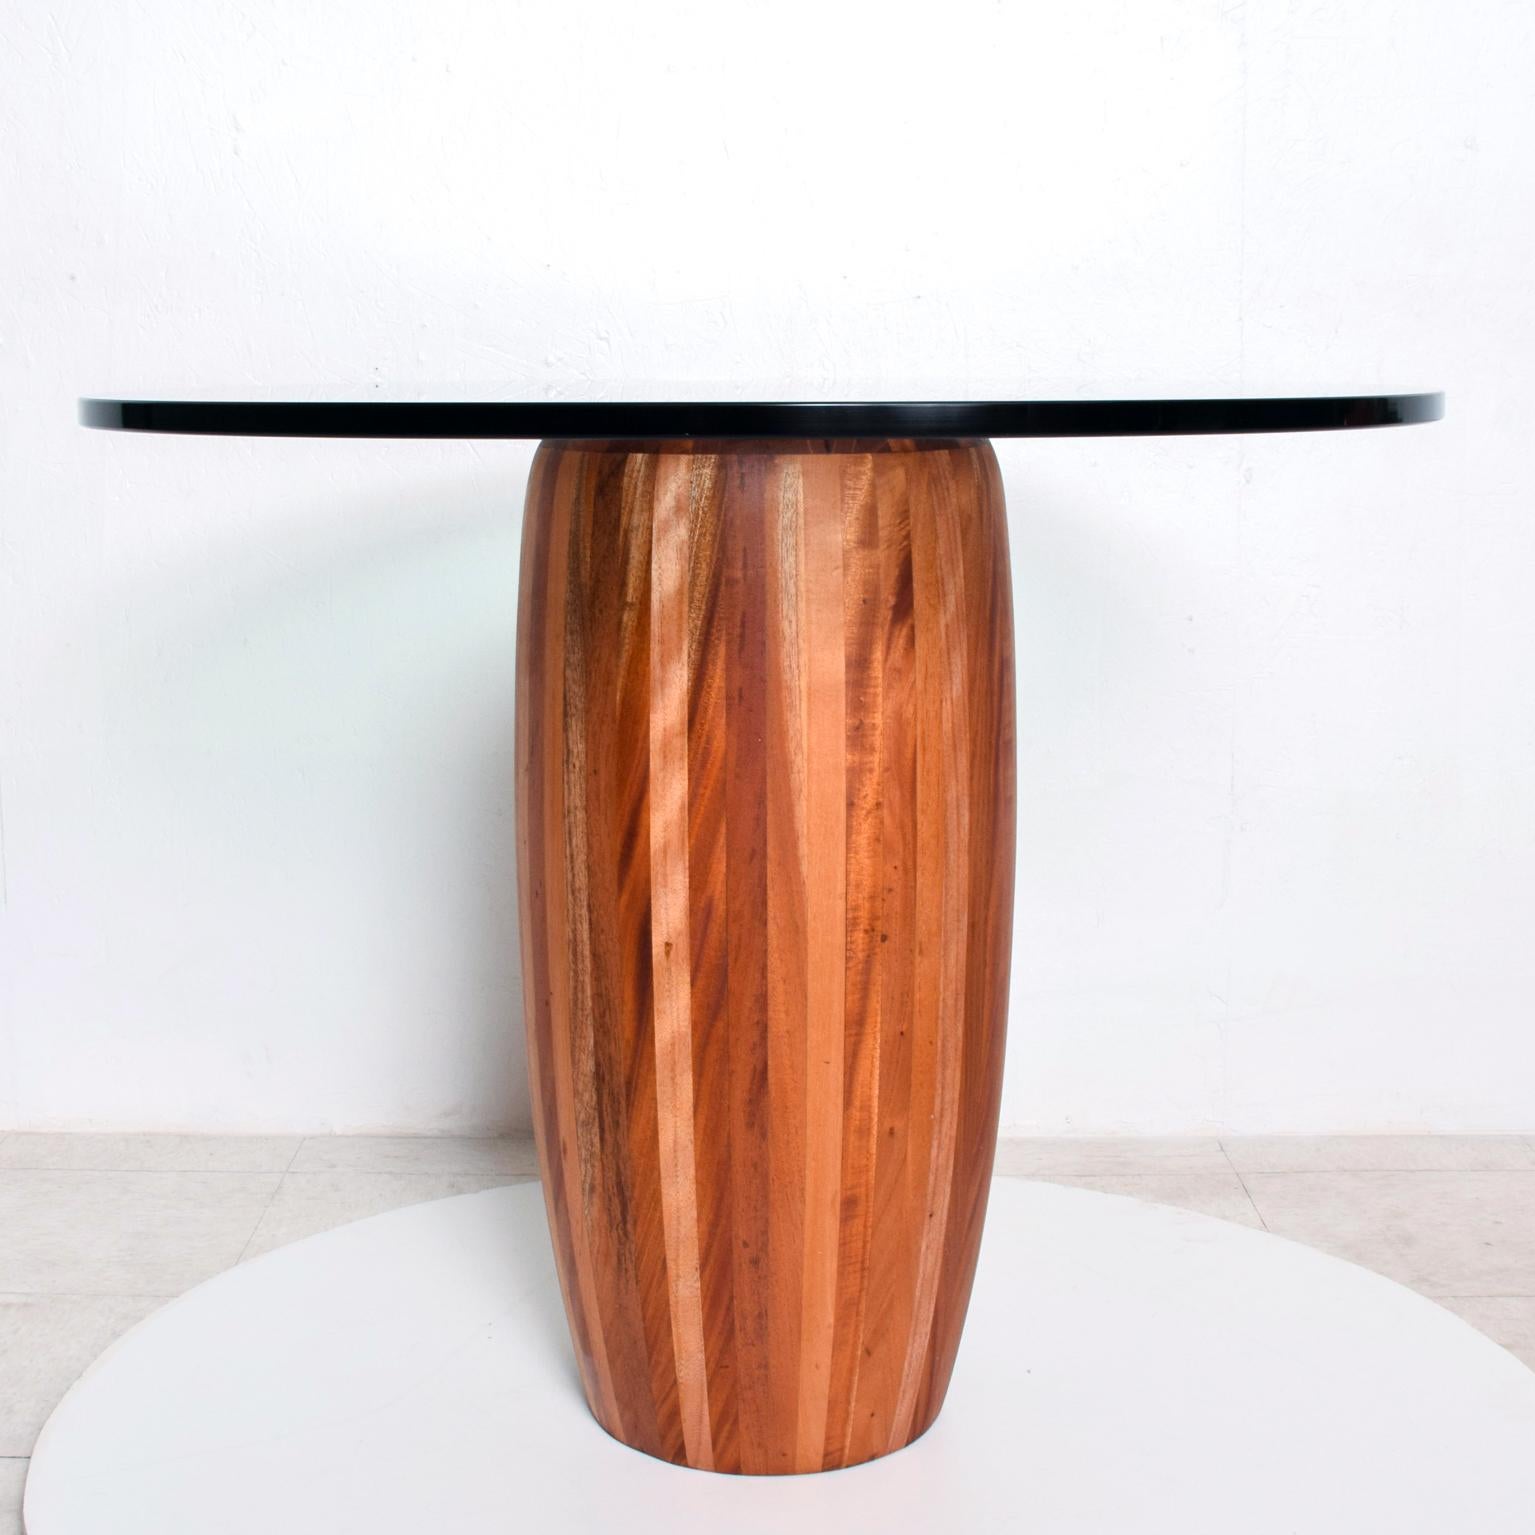 For your consideration, a center table. The pedestal base is constructed with solid cedar wood. The glass top is about 3/4